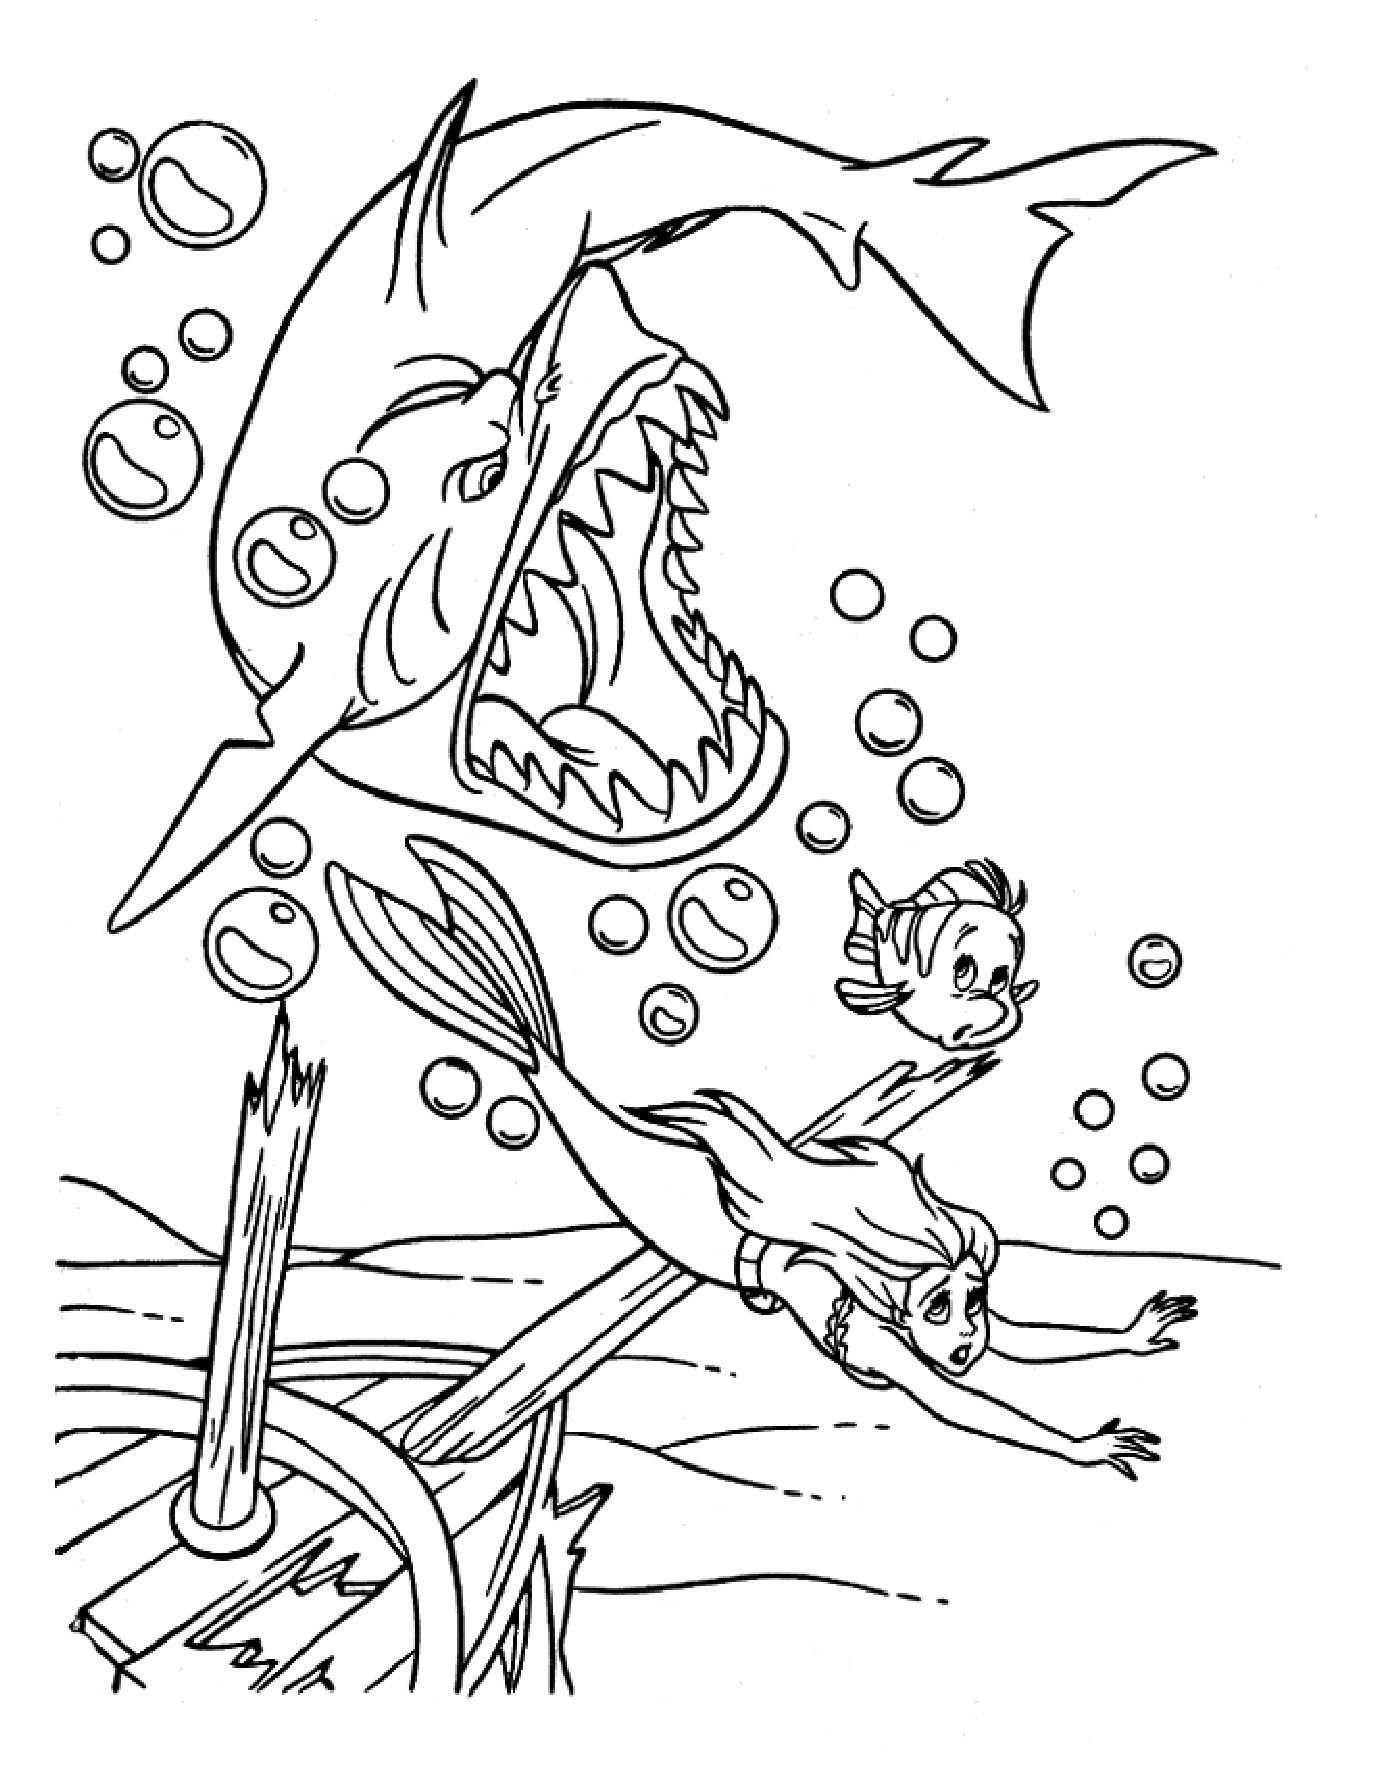 Mermaid Coloring Pages Free Printable
 The little mermaid coloring pages disney free printable